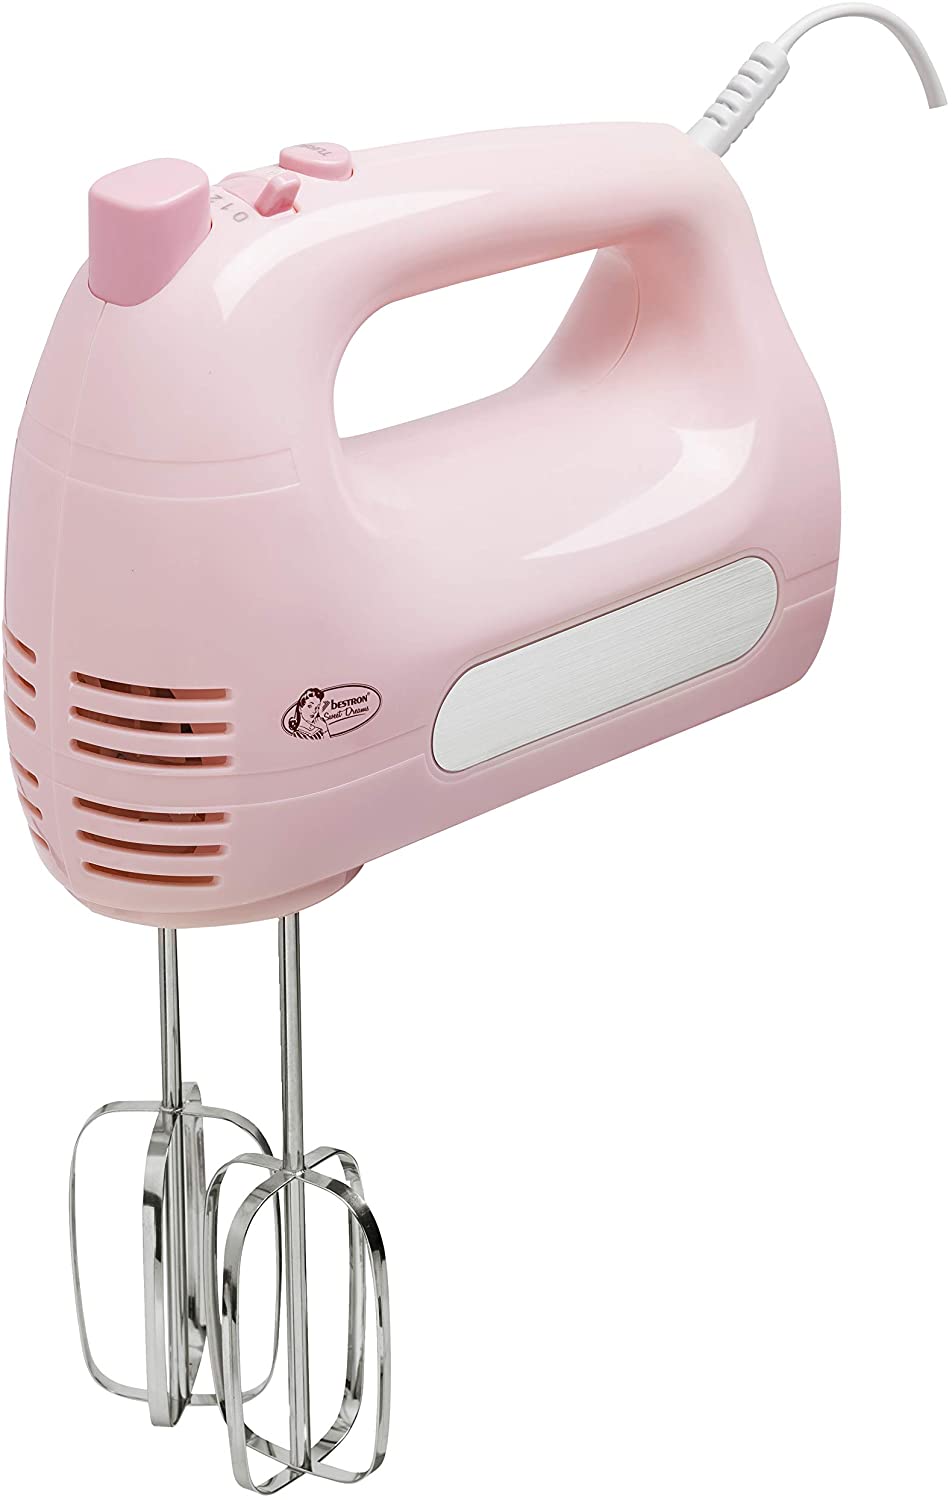 Bestron Hand Mixer with Beaters and Dough Hook, 6 Speed Selection, 300 W